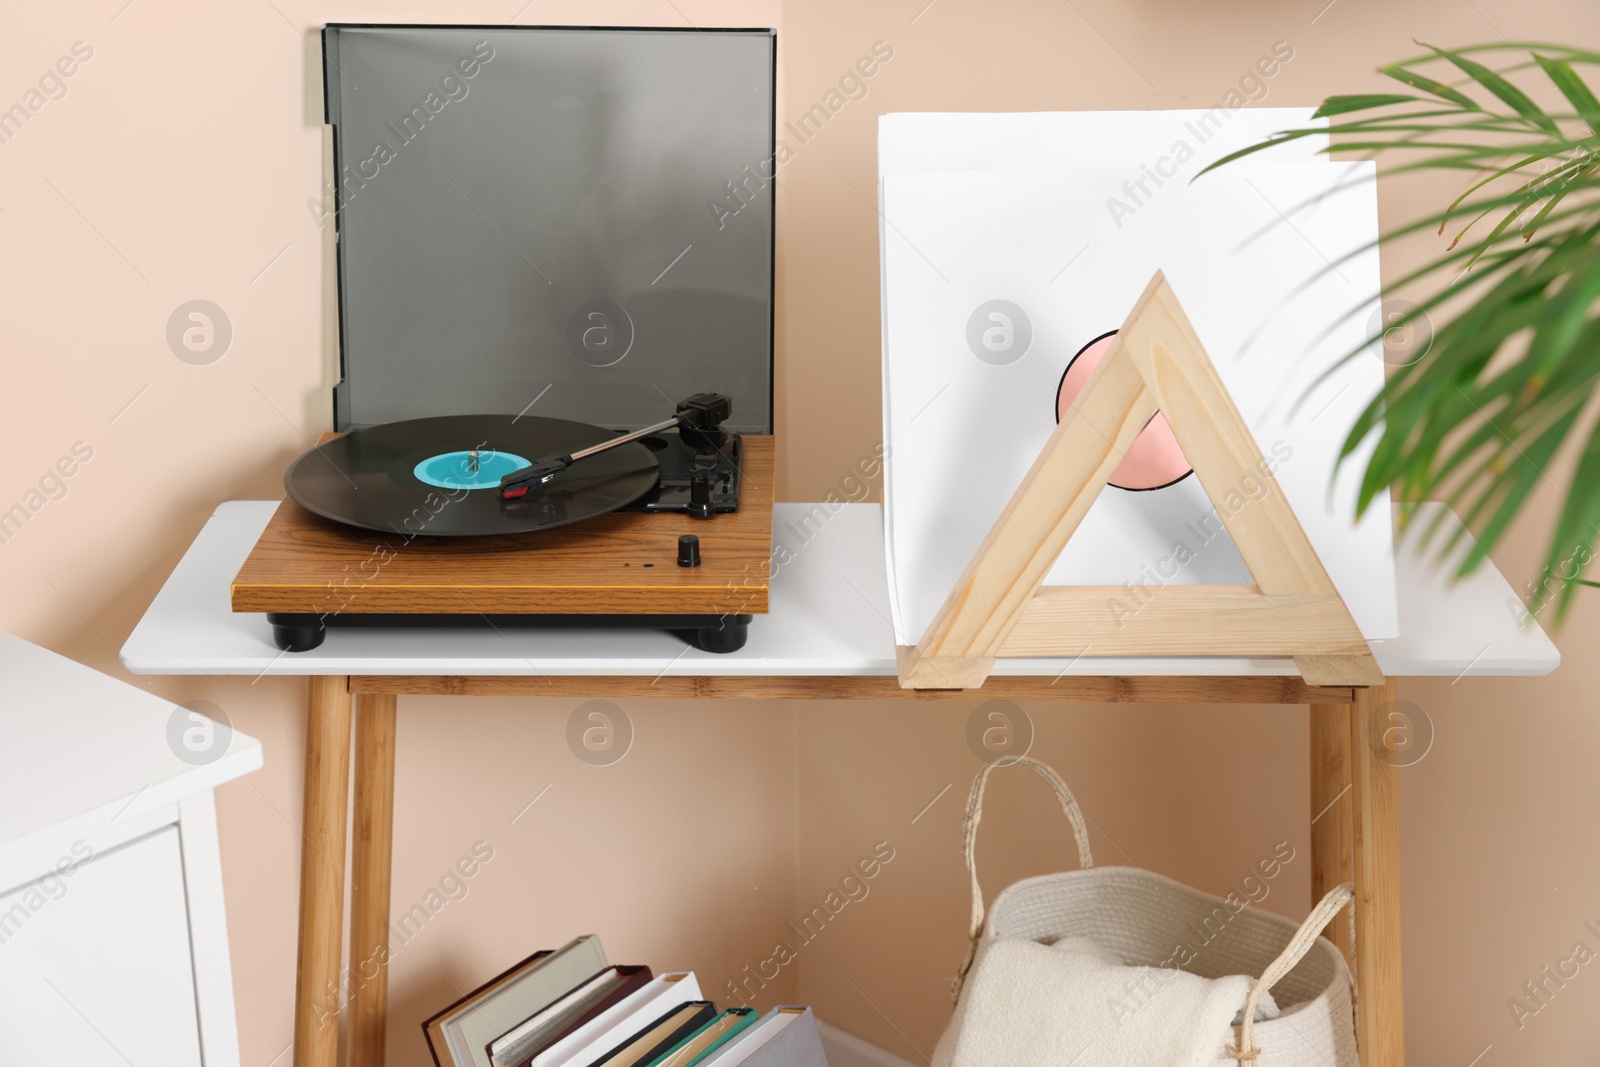 Photo of Stylish turntable with vinyl record on console table in room